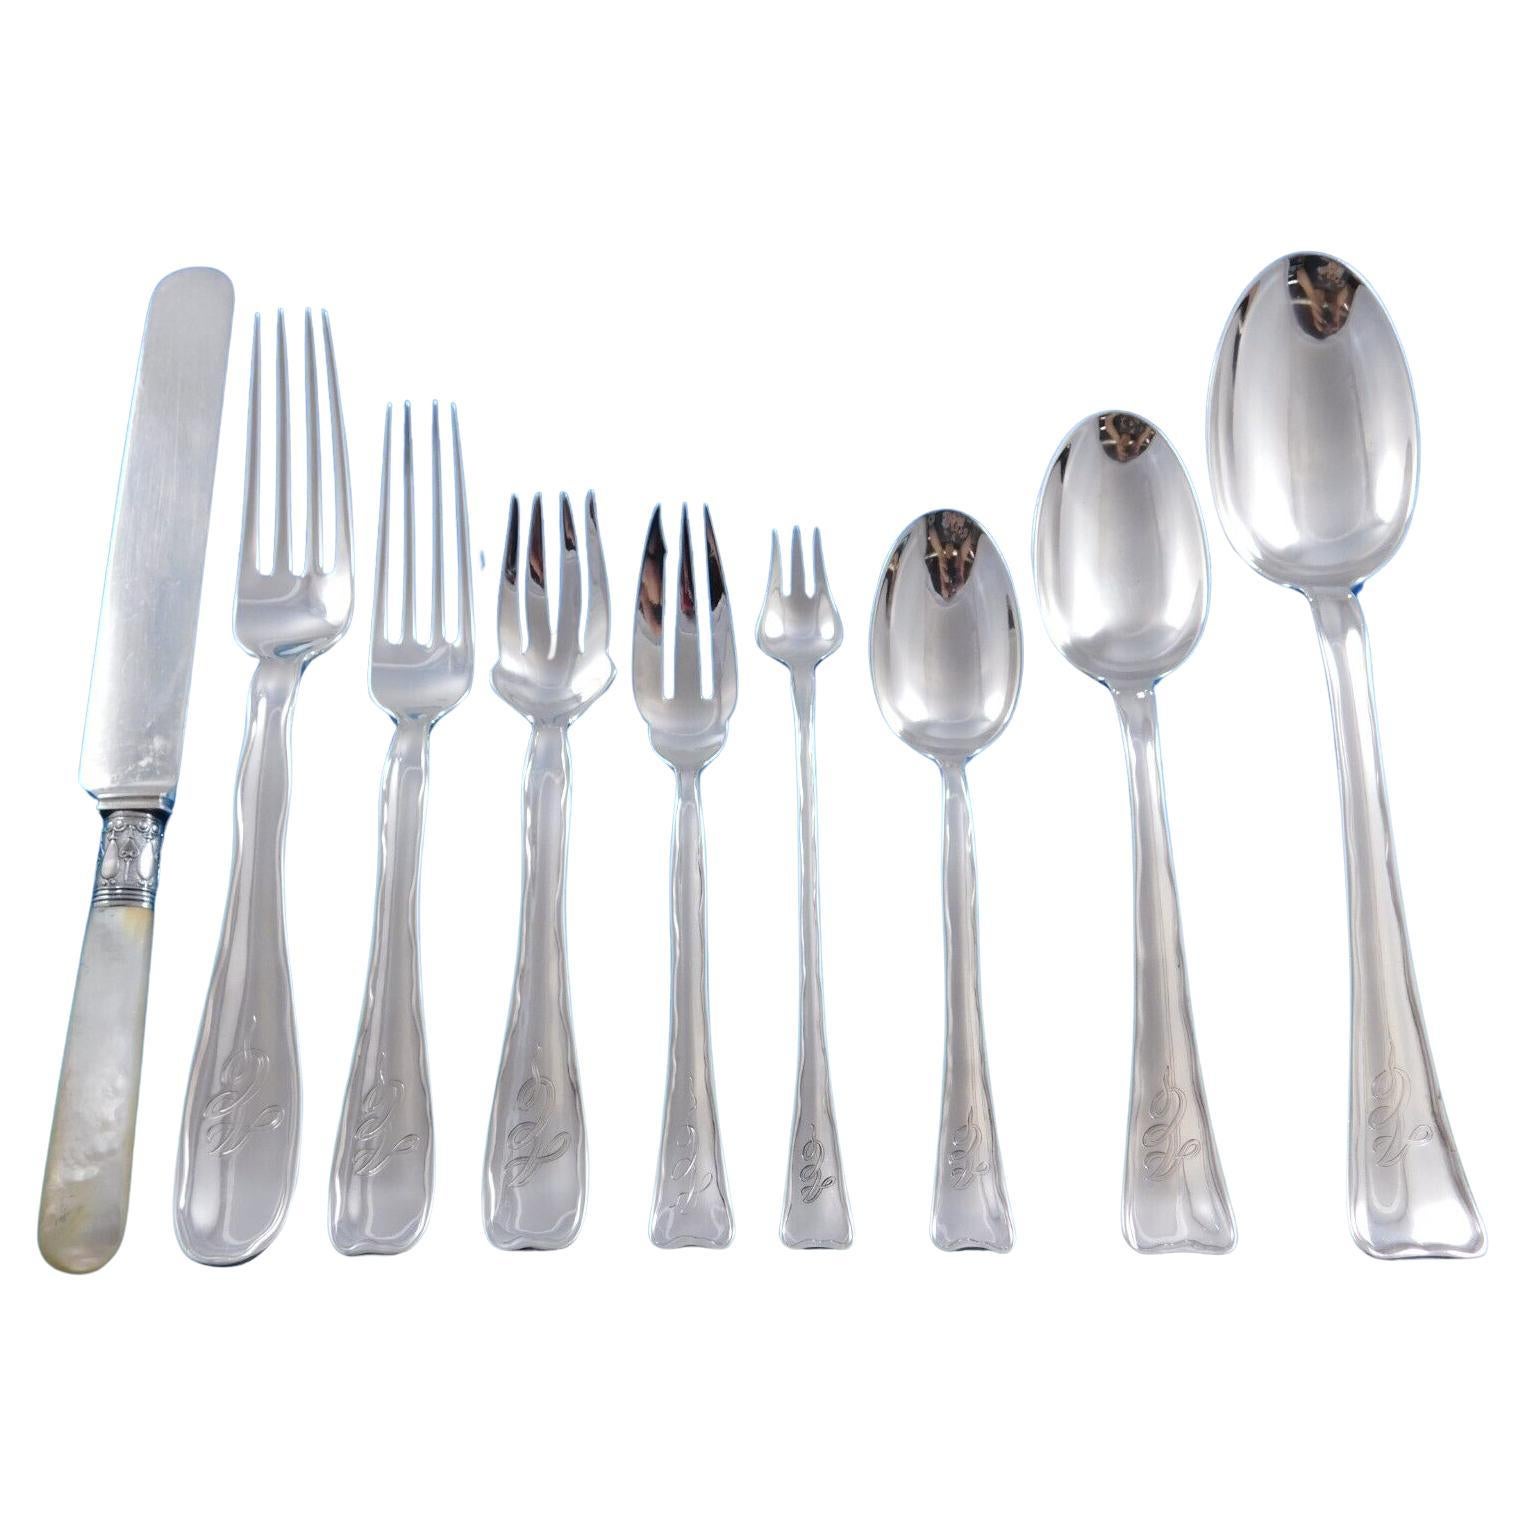 https://a.1stdibscdn.com/lap-over-edge-plain-by-tiffany-co-sterling-silver-flatware-set-service-108-pc-for-sale/f_10224/f_363655721695909706471/f_36365572_1695909706859_bg_processed.jpg